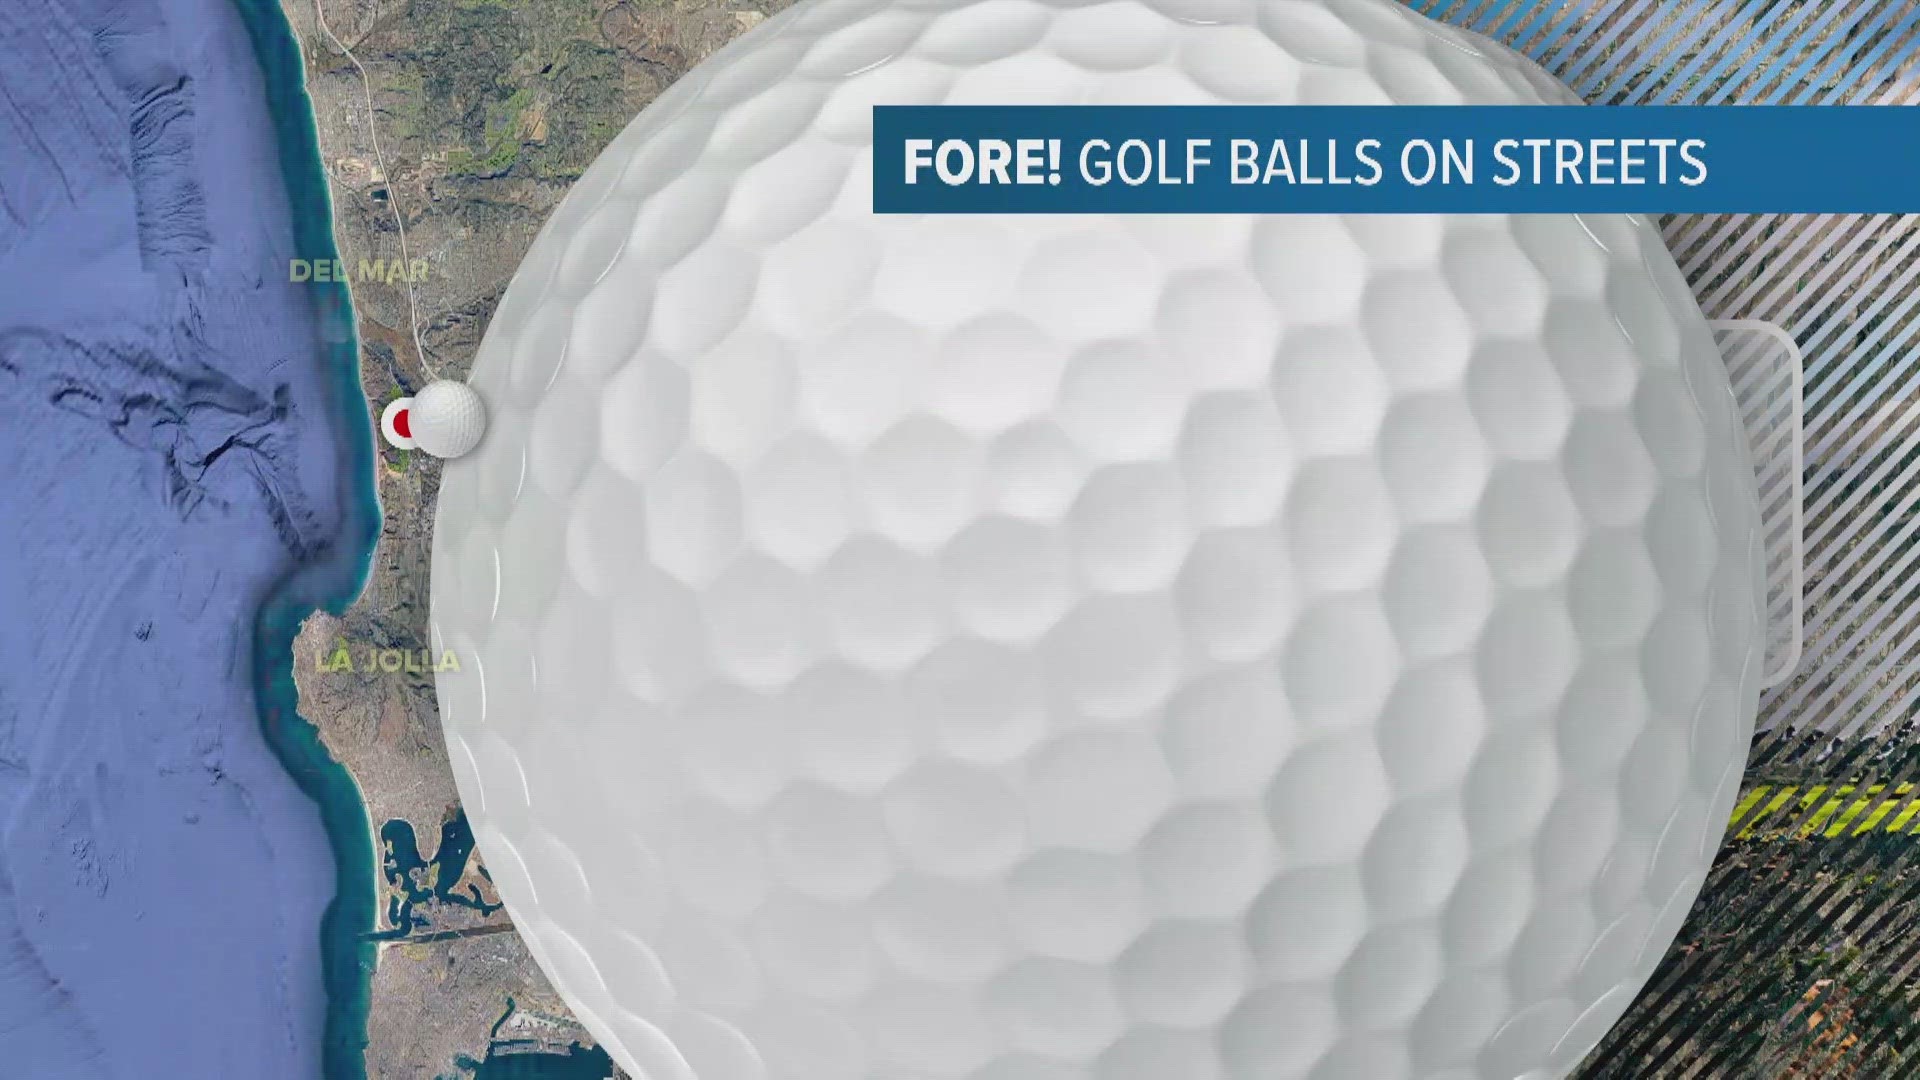 100 drivers file claims after their cars were hit by poorly-hit golf balls.